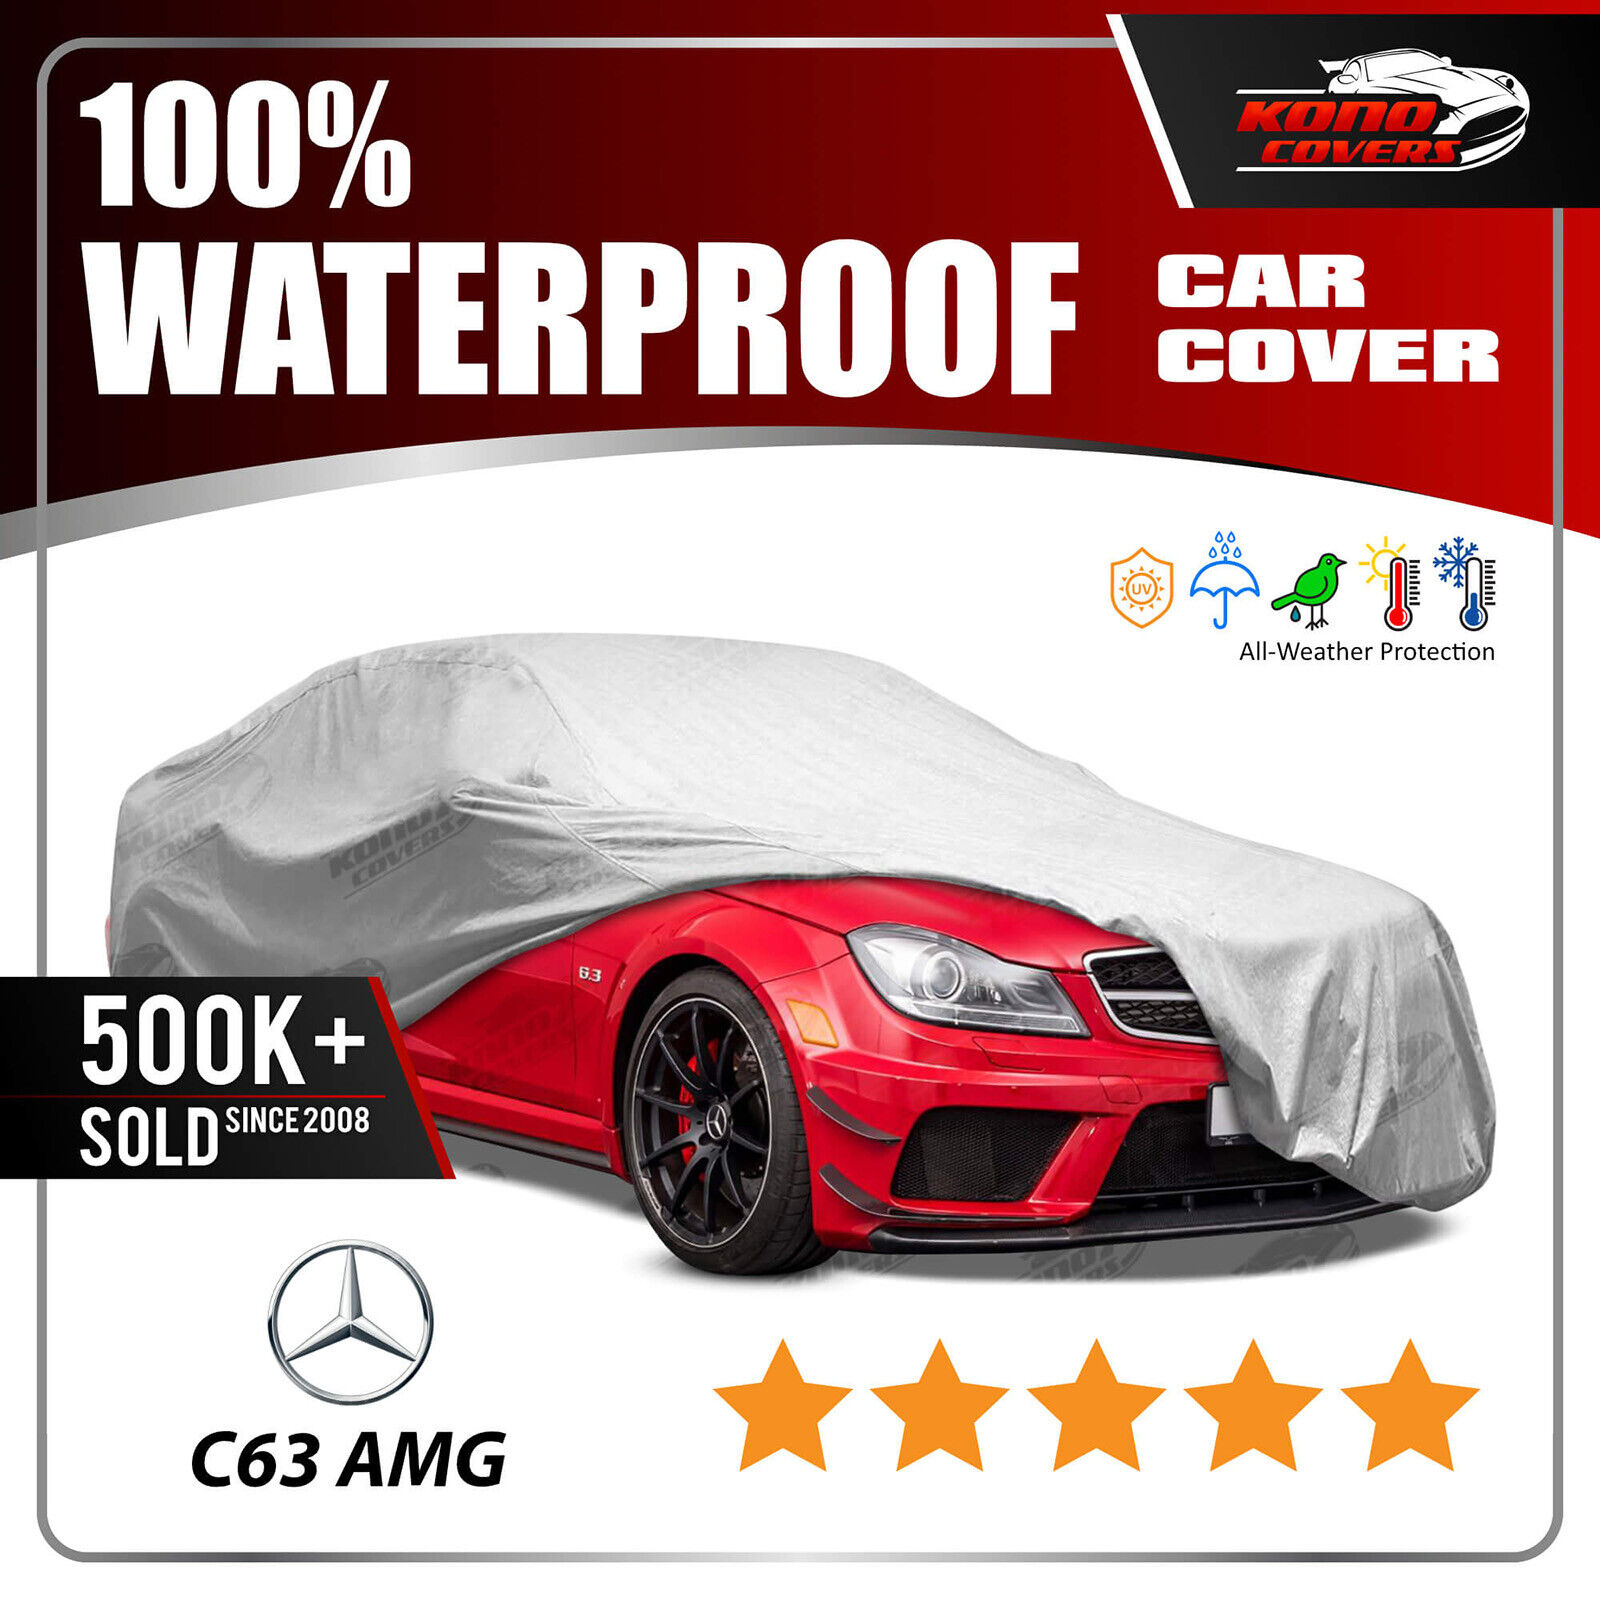 Mercedes-Benz C63 Amg 6 Layer Waterproof Car Cover 2008 2009 2010 2011 2012